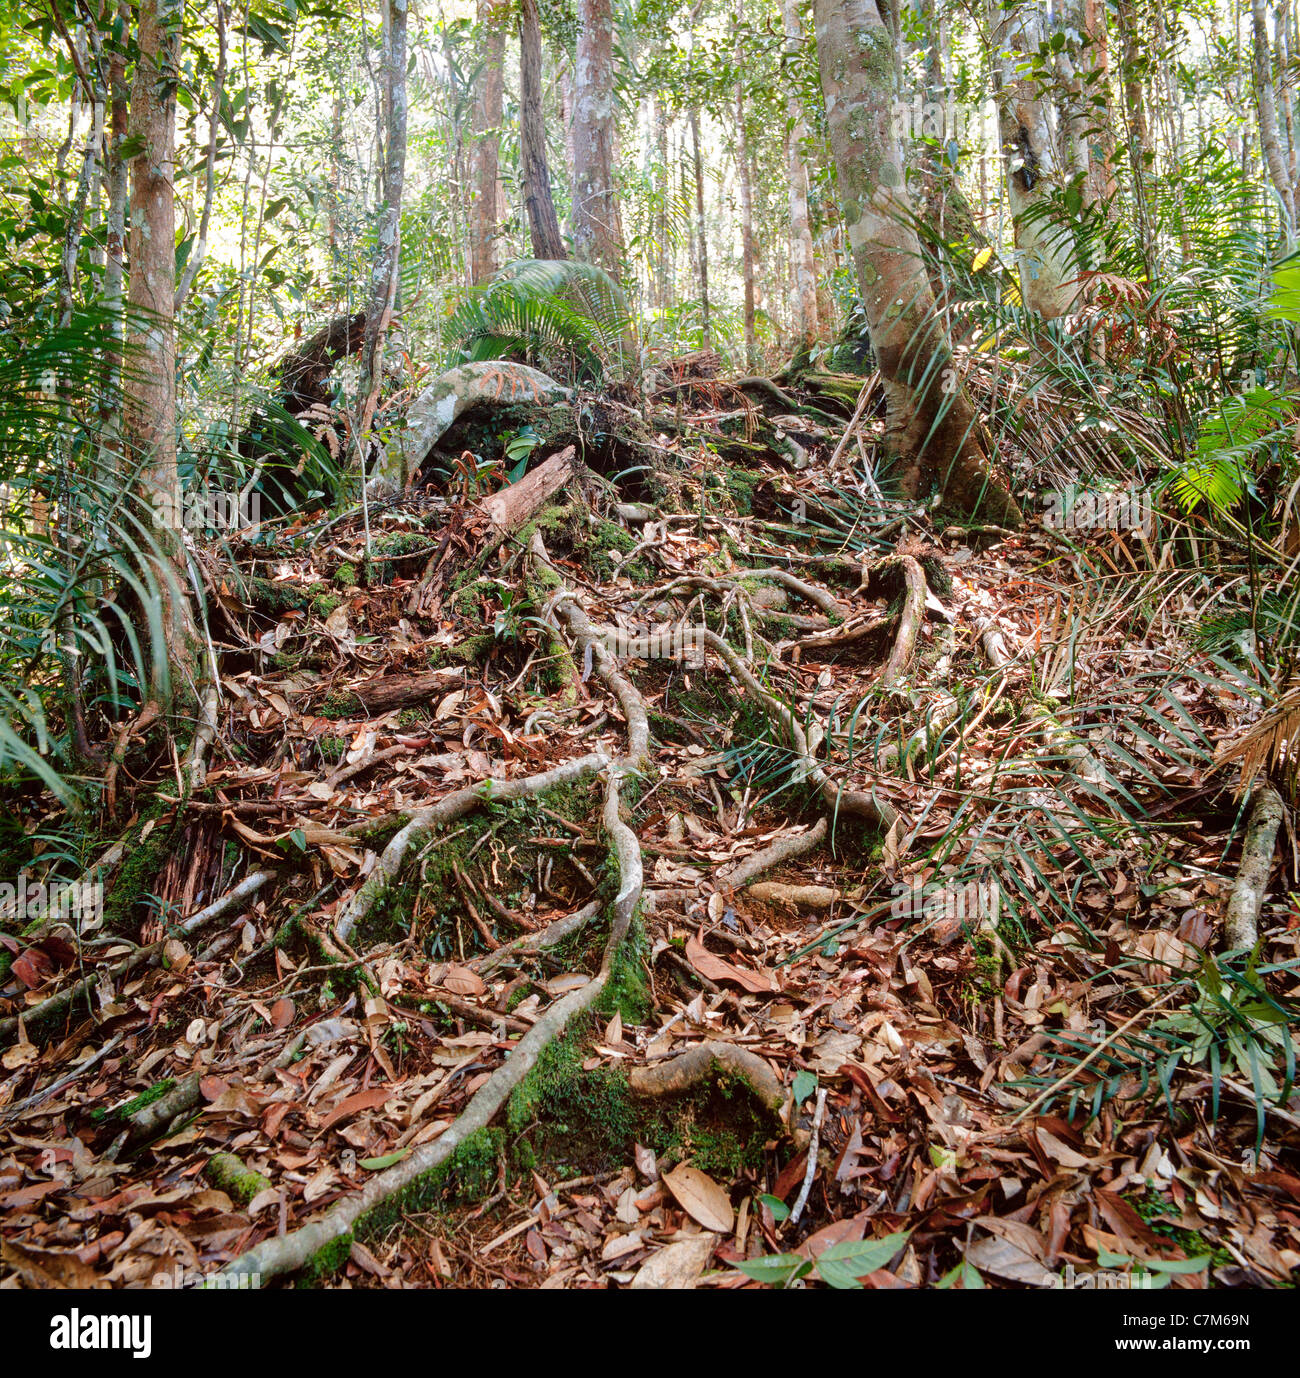 Mulu National Park rainforest, Sarawak, Borneo, East Malaysia, aerial roots of hardwood trees, buttress roots, rich undergrowth, floor Stock Photo